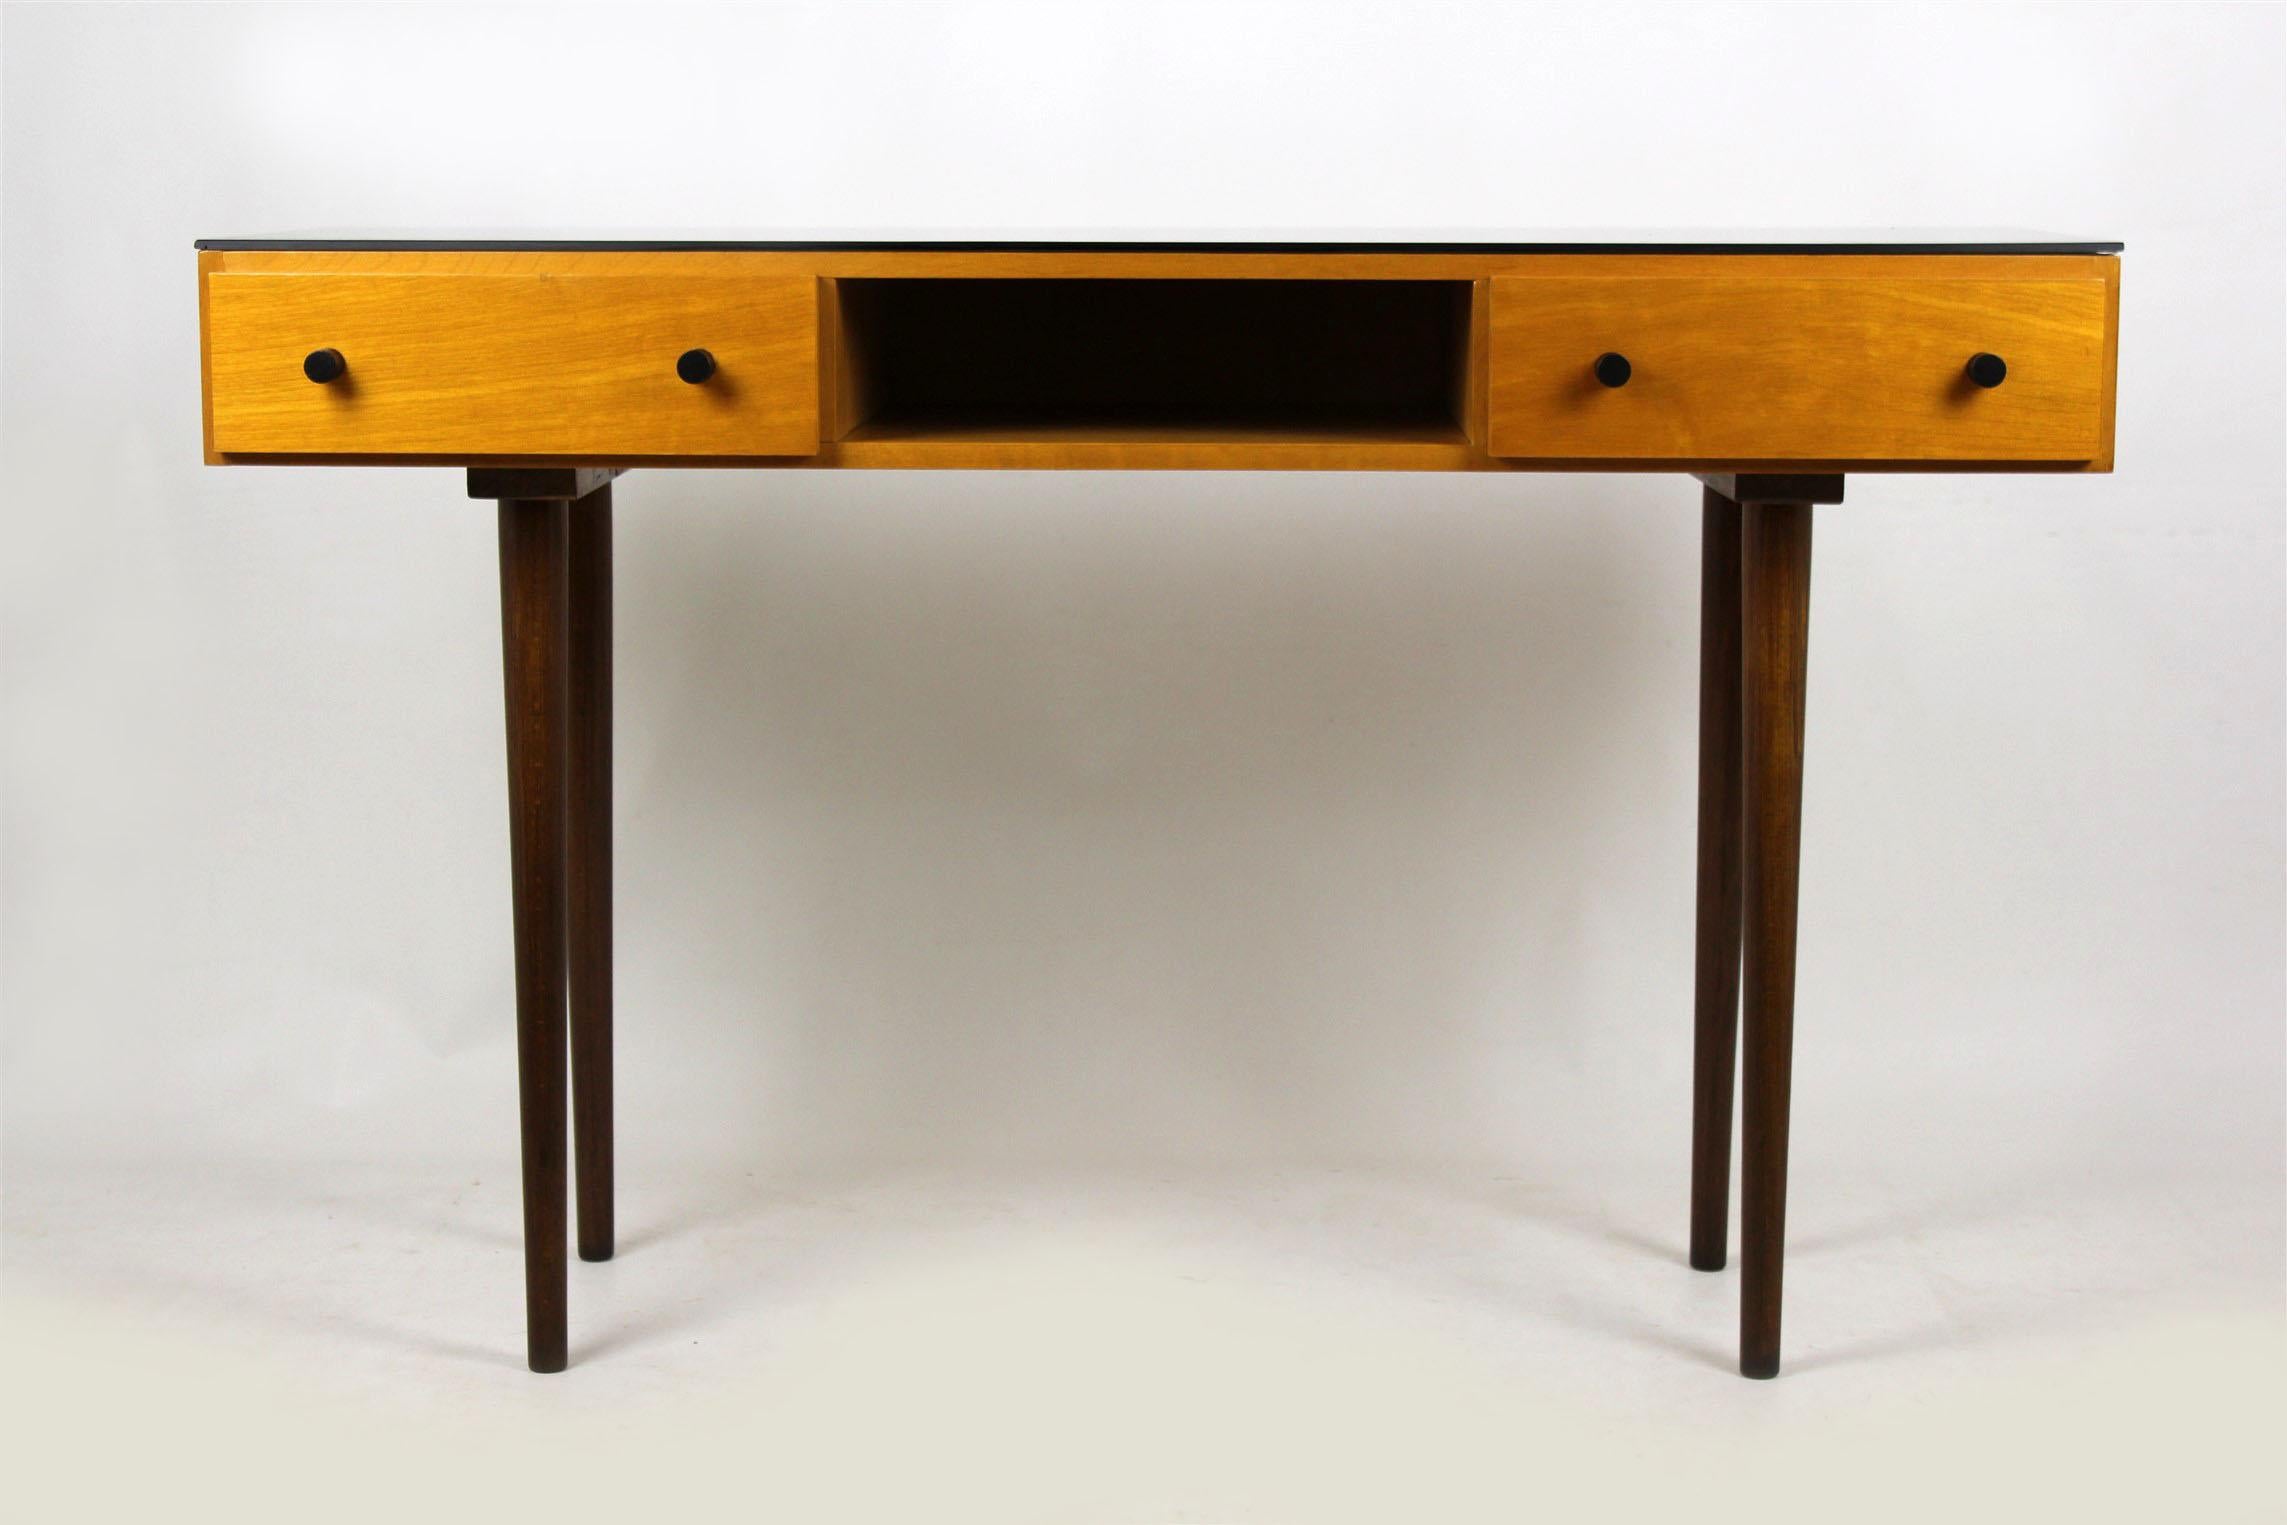 Mid-Century Modern Midcentury Desk or Console Table by M. Požár for Up Bučovice, 1960s